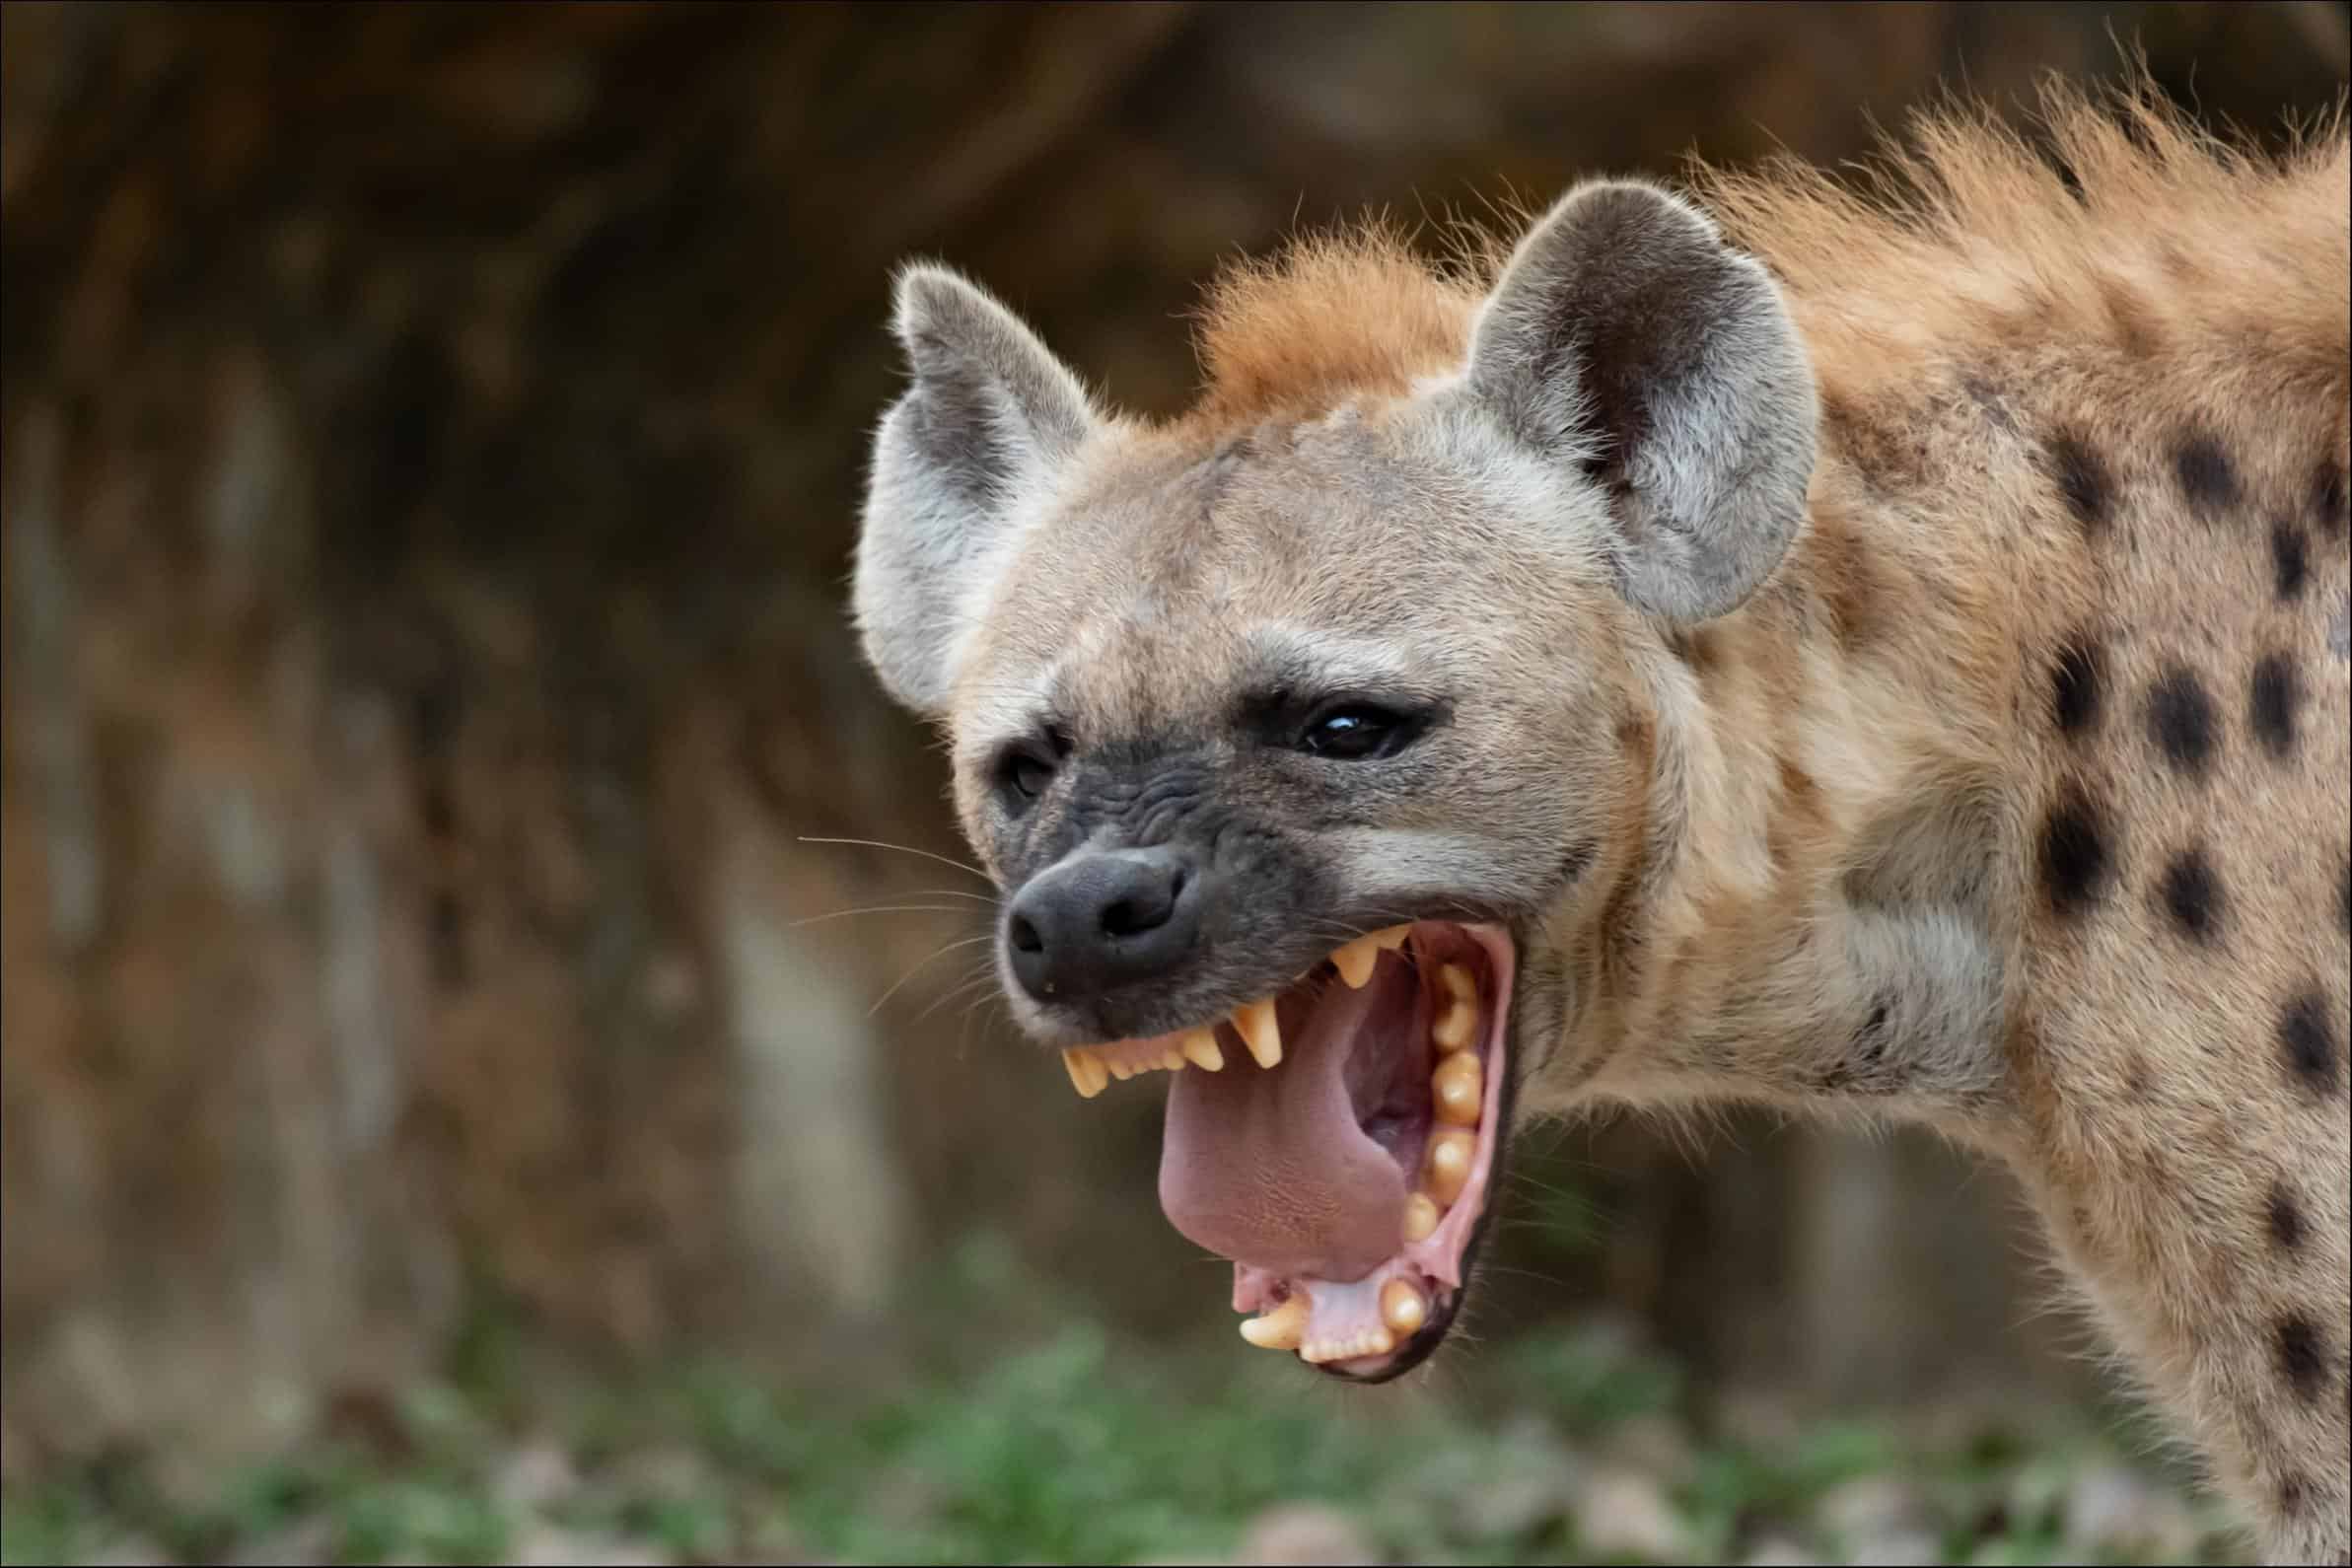 Lion vs Hyena: Who Would Win in a Fight? - AZ Animals